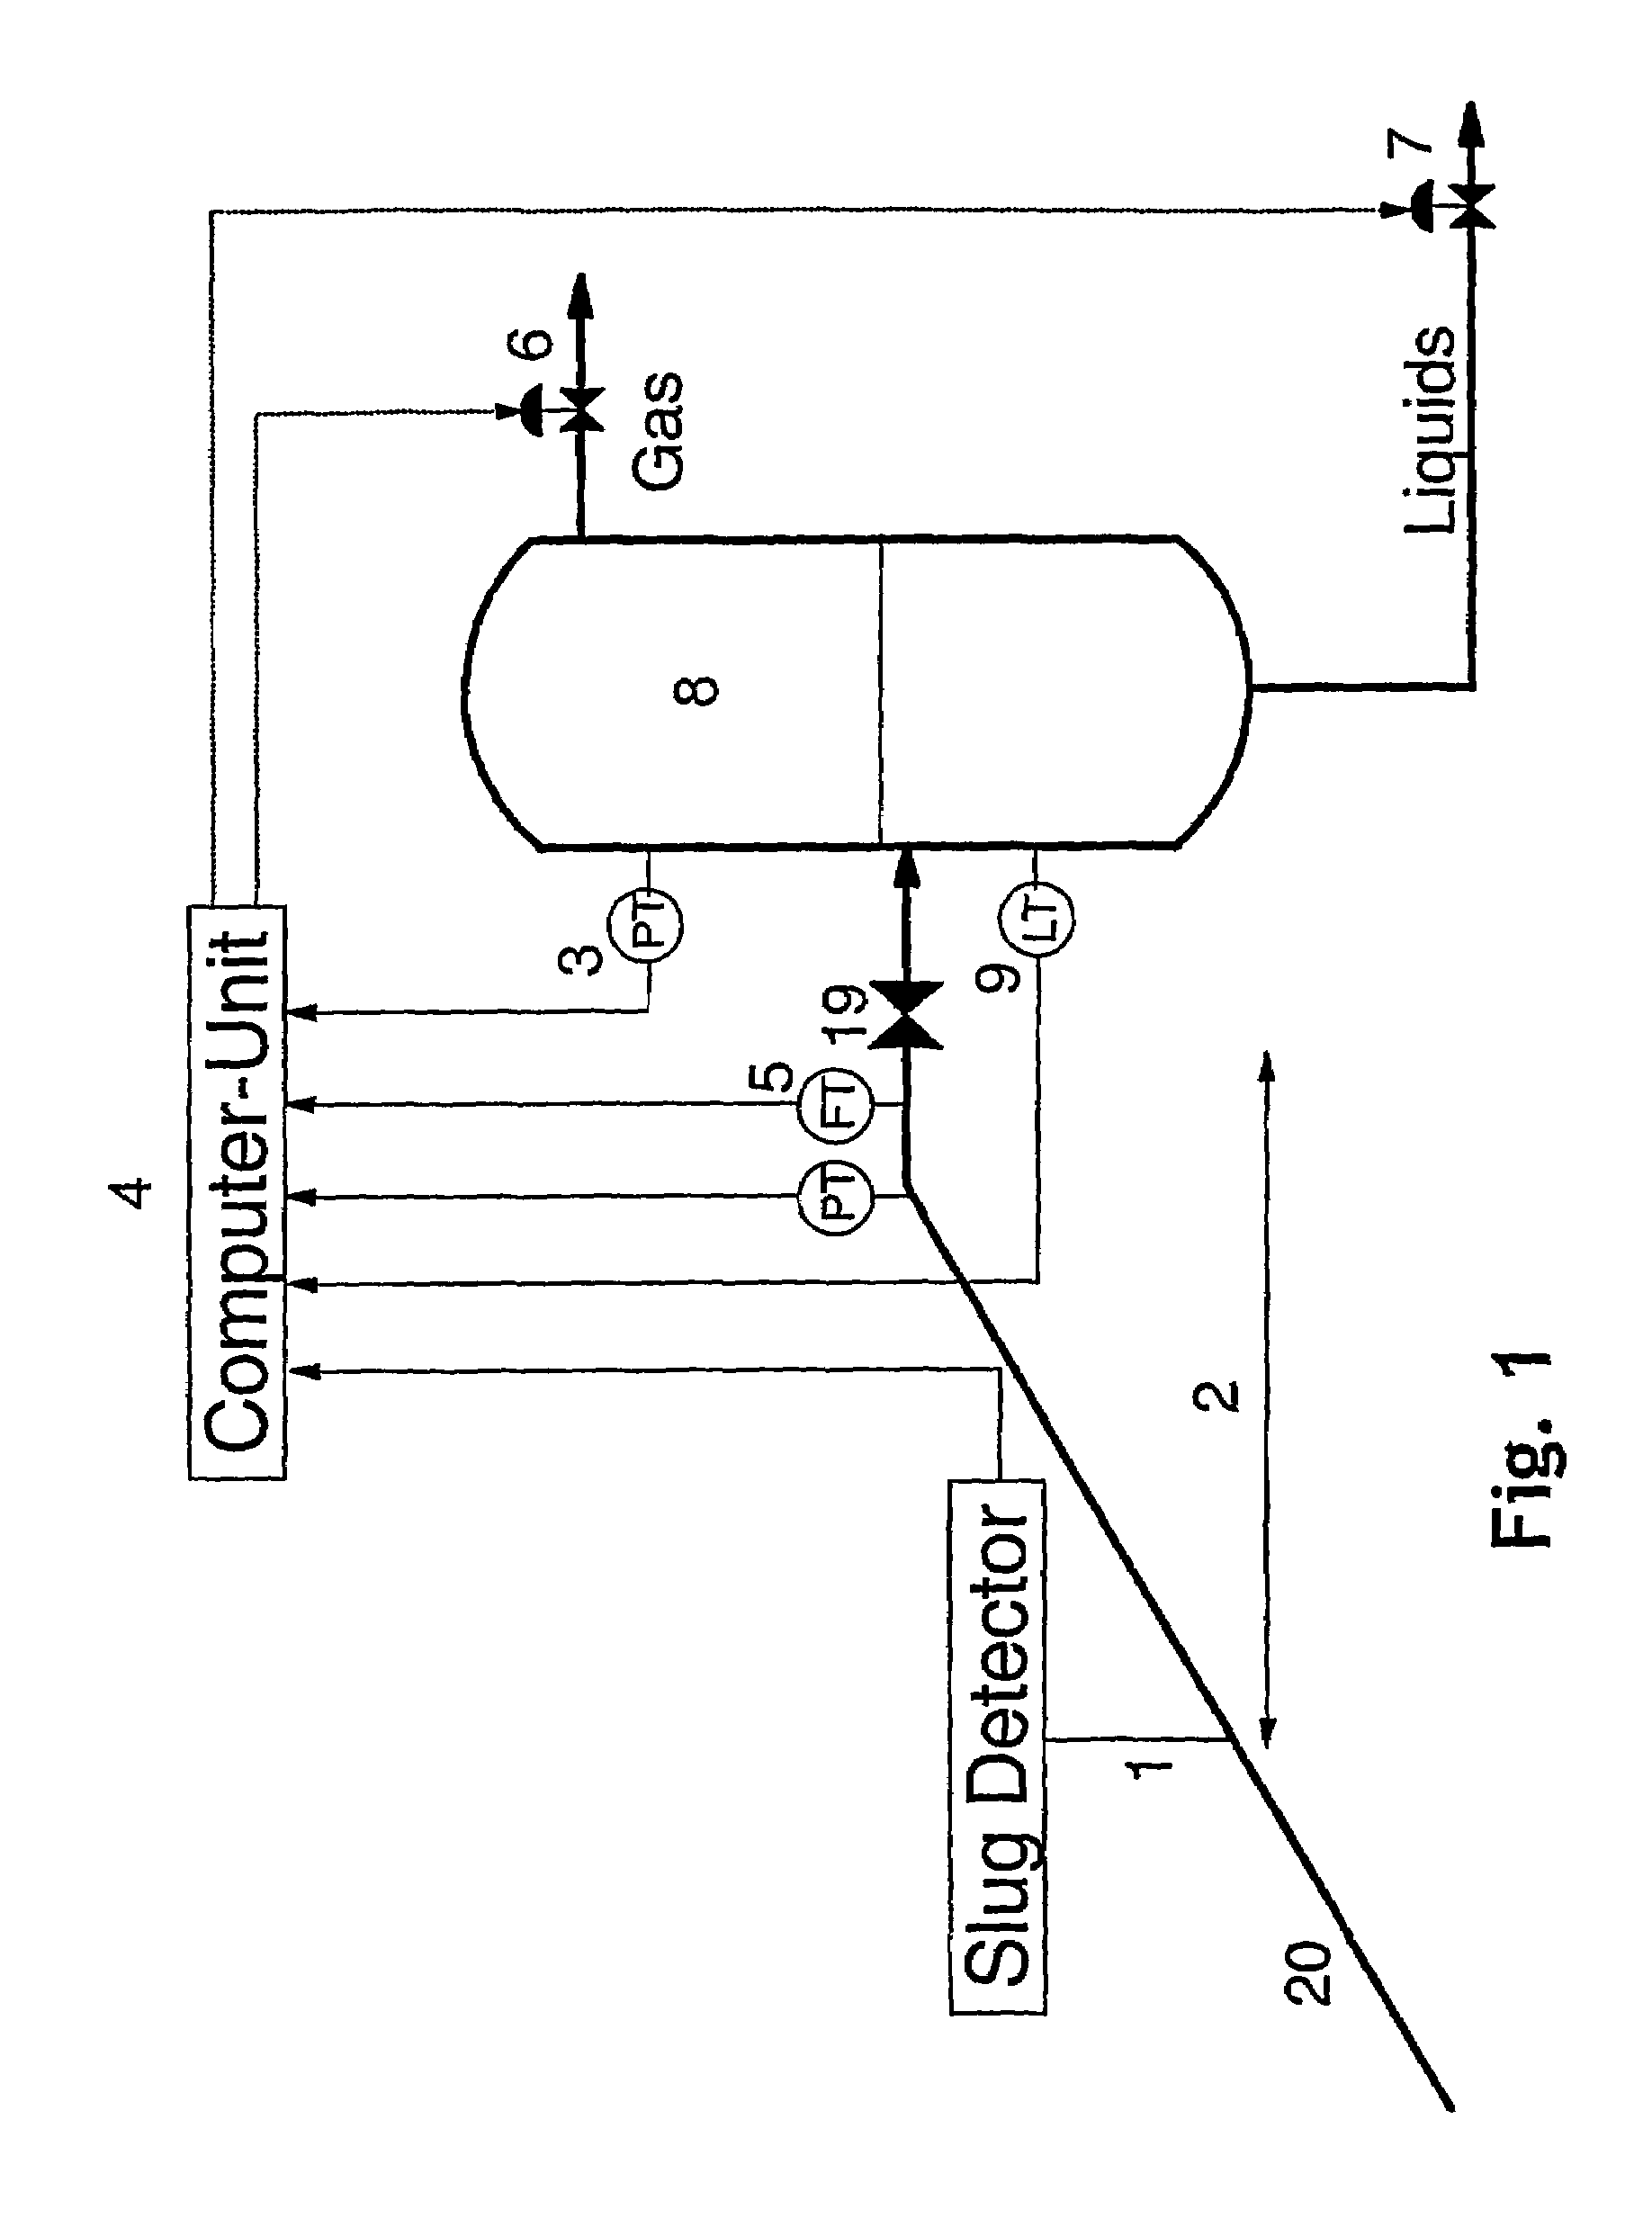 System and a method for prediction and treatment of slugs being formed in a flow line or wellbore tubing